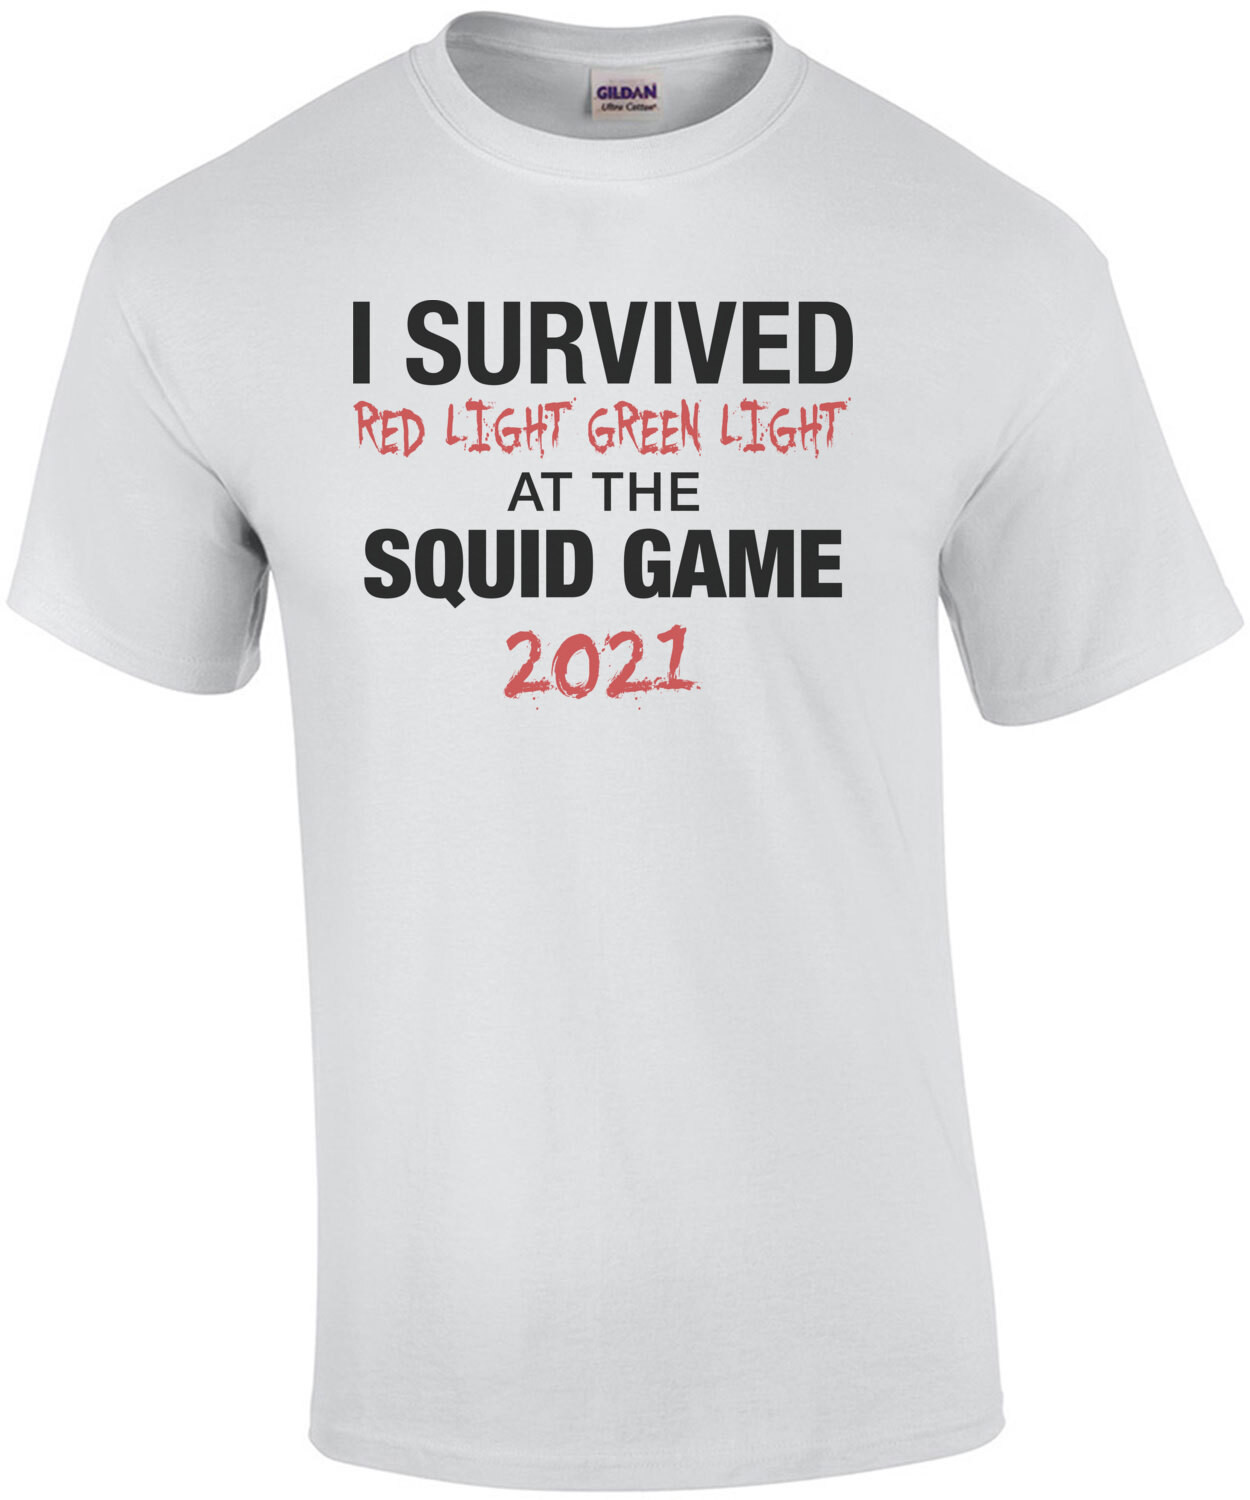 I Survived Red Light Green Light at the Squid Game 2021 - Squid Game T-Shirt